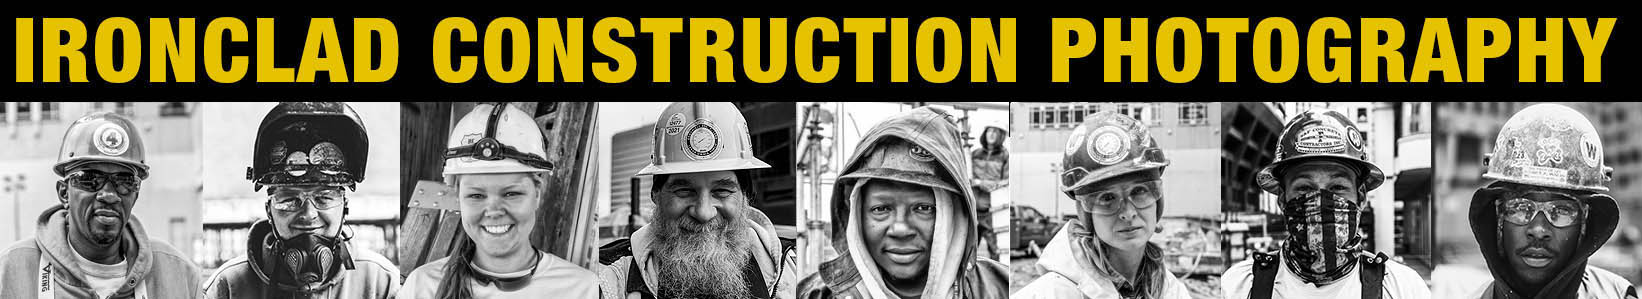 Ironclad construction photography by Lou Jones